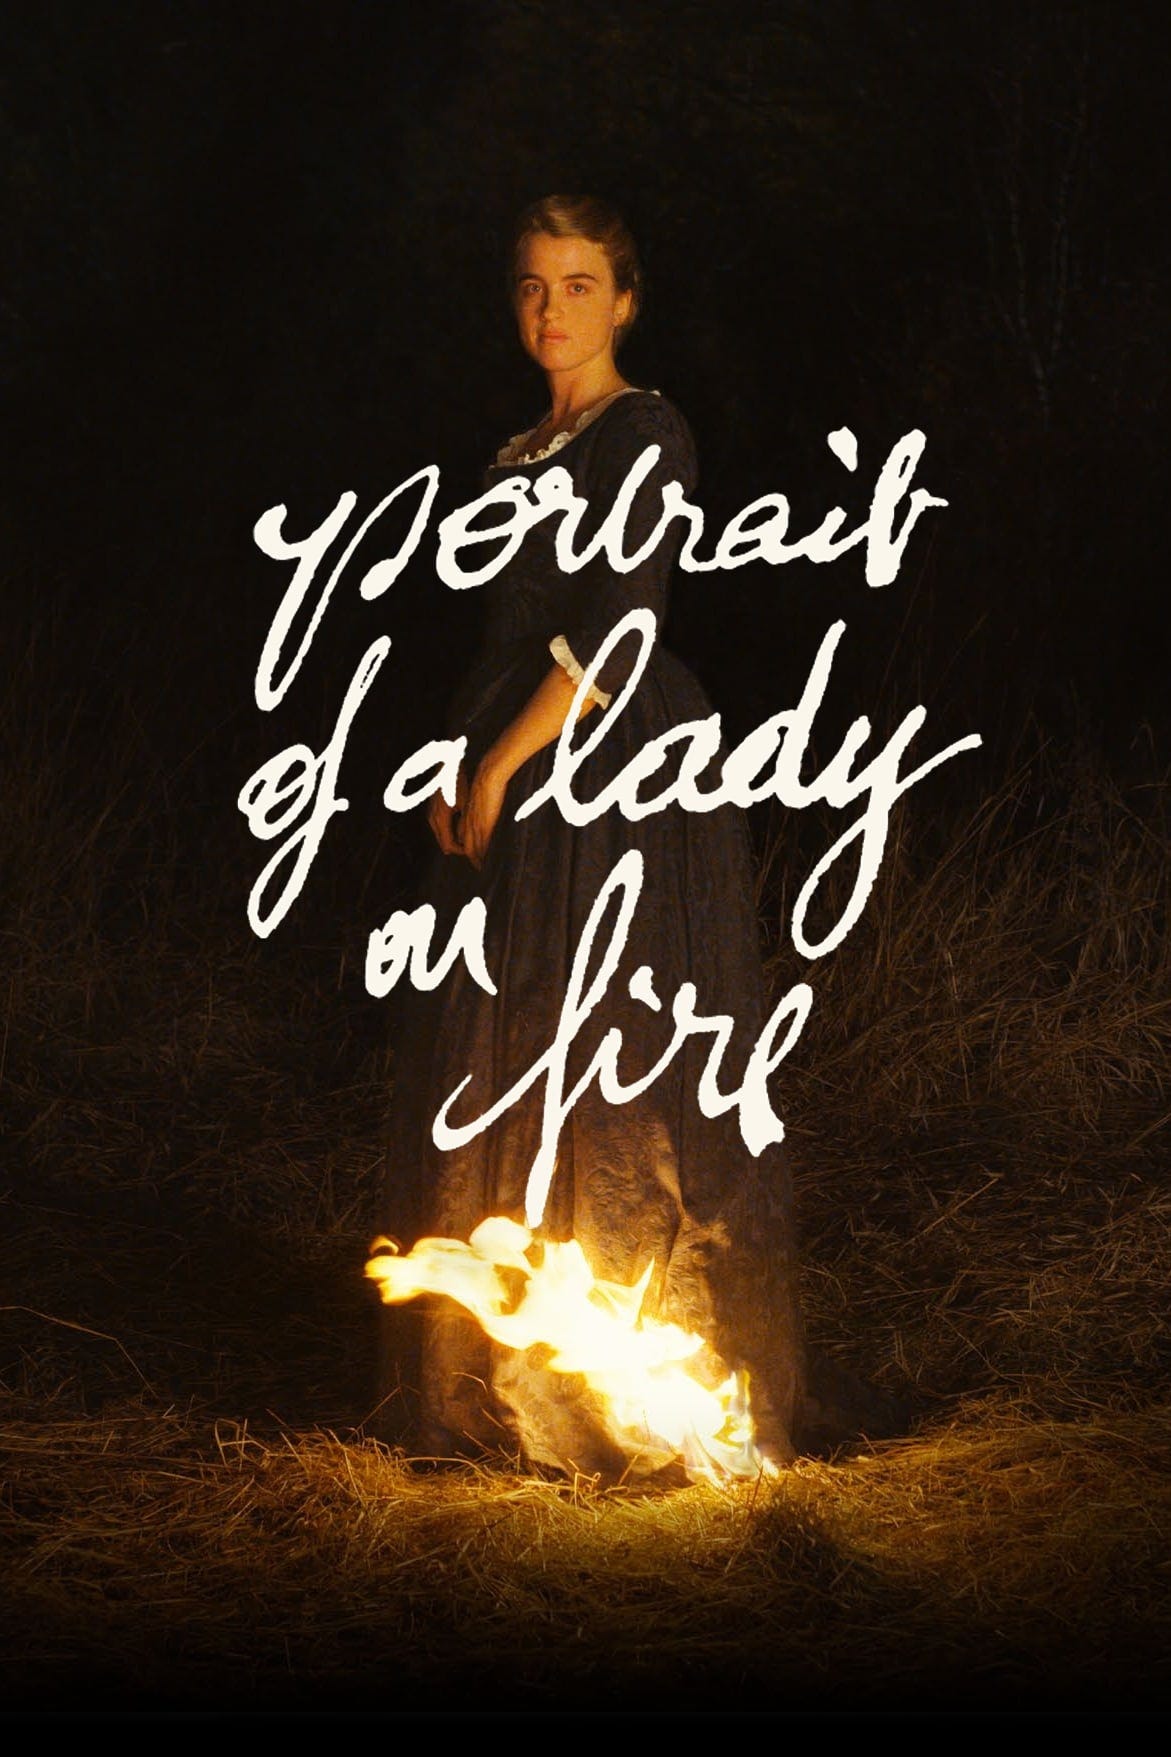 Watch Portrait of a Lady on Fire (2019) Full Movie at megafilm4k.com